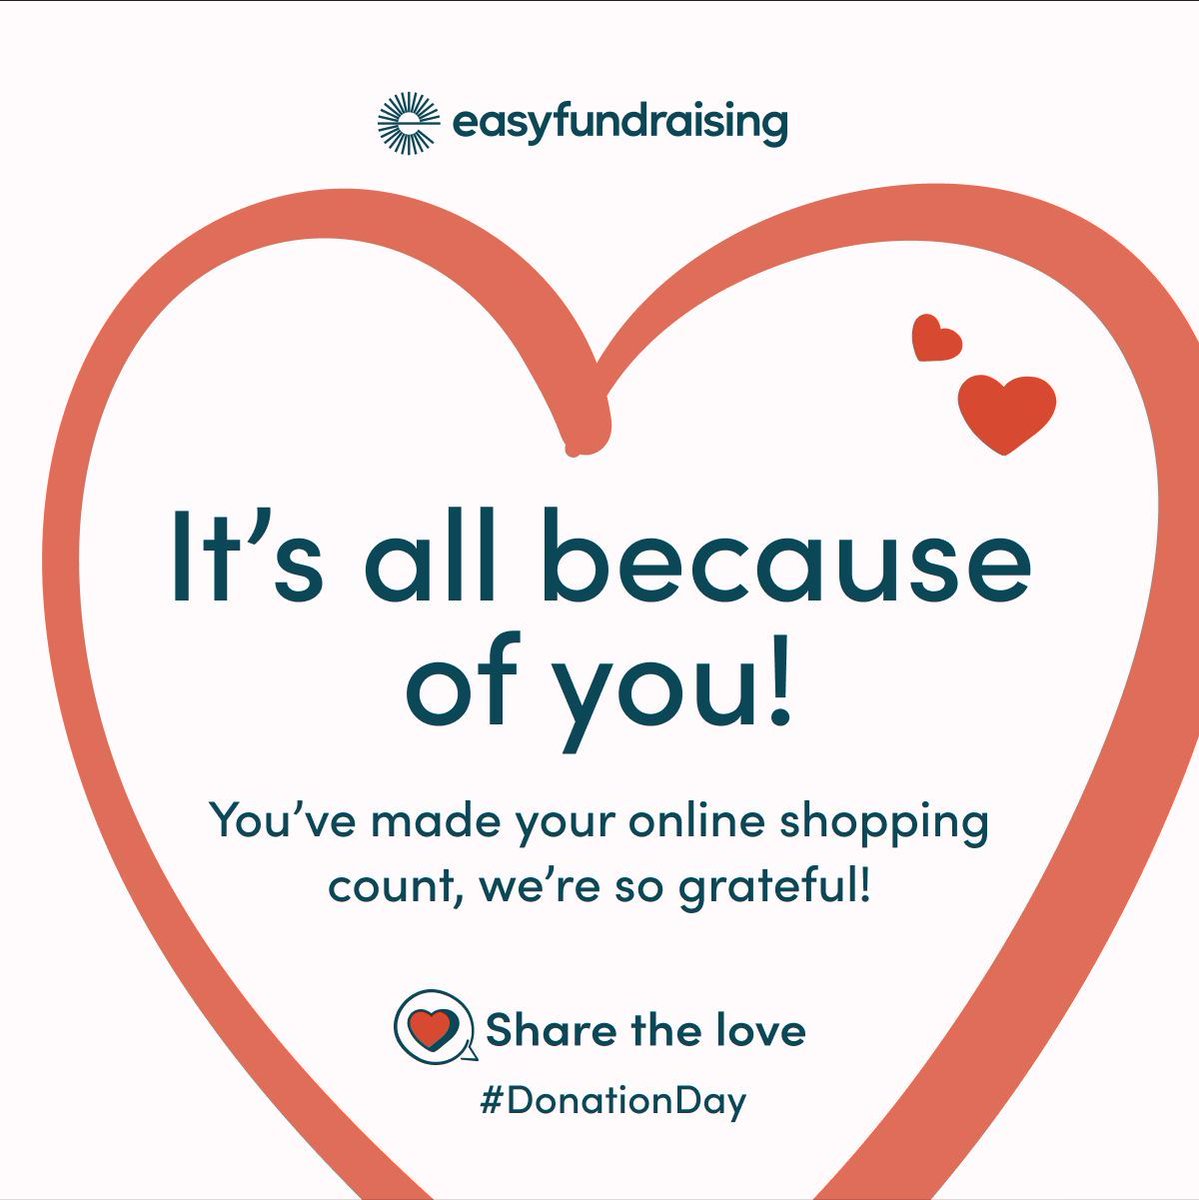 Amazing news, this #DonationDay Hire a Hero has been paid! Thank you to everyone who supports us through easyfundraising - you're incredible! Sign up for free and turn your online shopping at over 8,000 brands into free donations for our cause! buff.ly/3uCWMuL